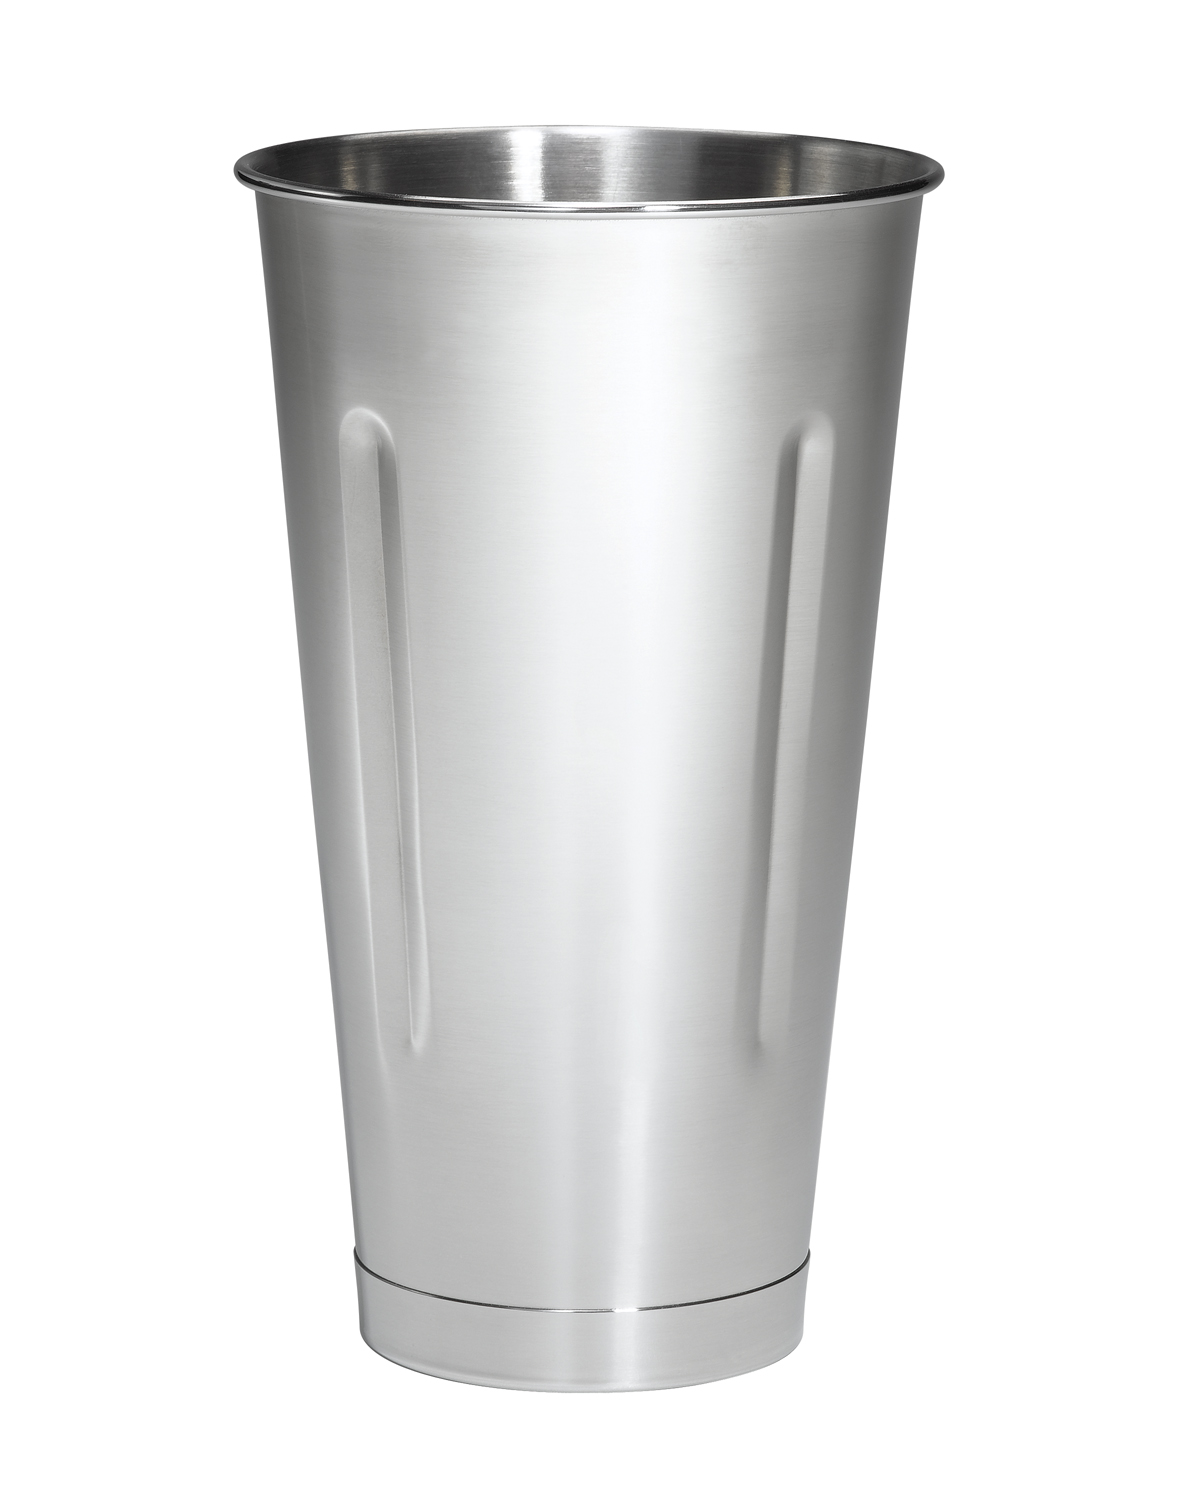 Universal Stainless Steel Container